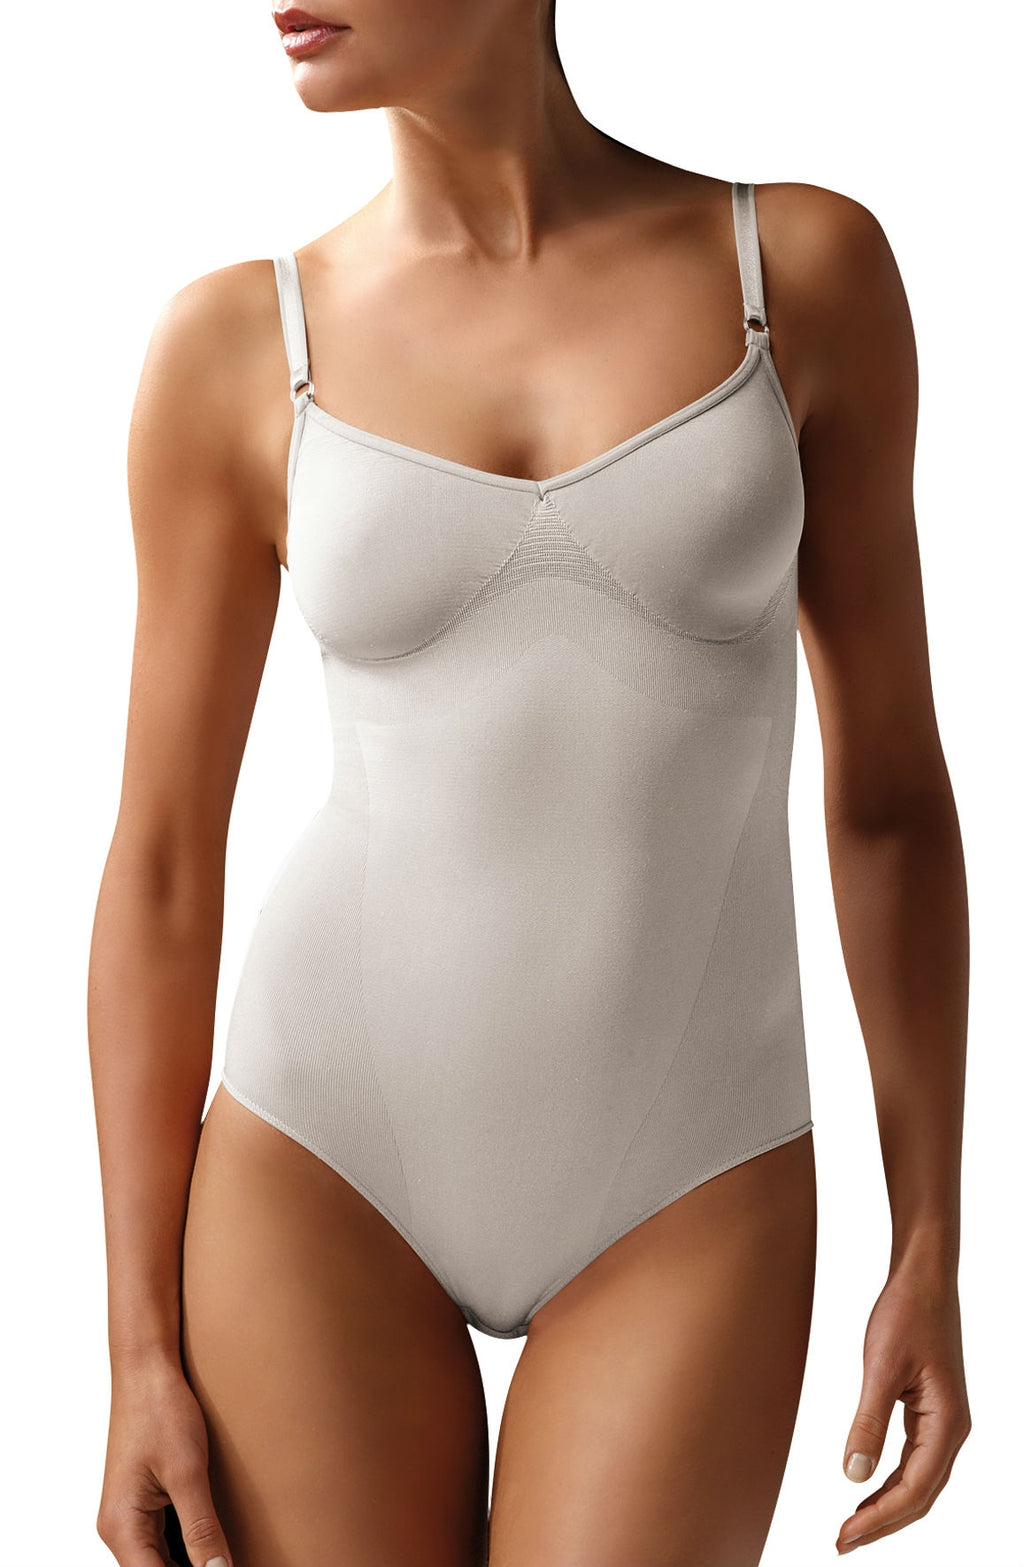 Controlbody 510194 Bianco Body L  All Offers, Bodies, Control Body, Lingerie Sets, NEWLY-IMPORTED, SALE, Shapewear - So Luxe Lingerie